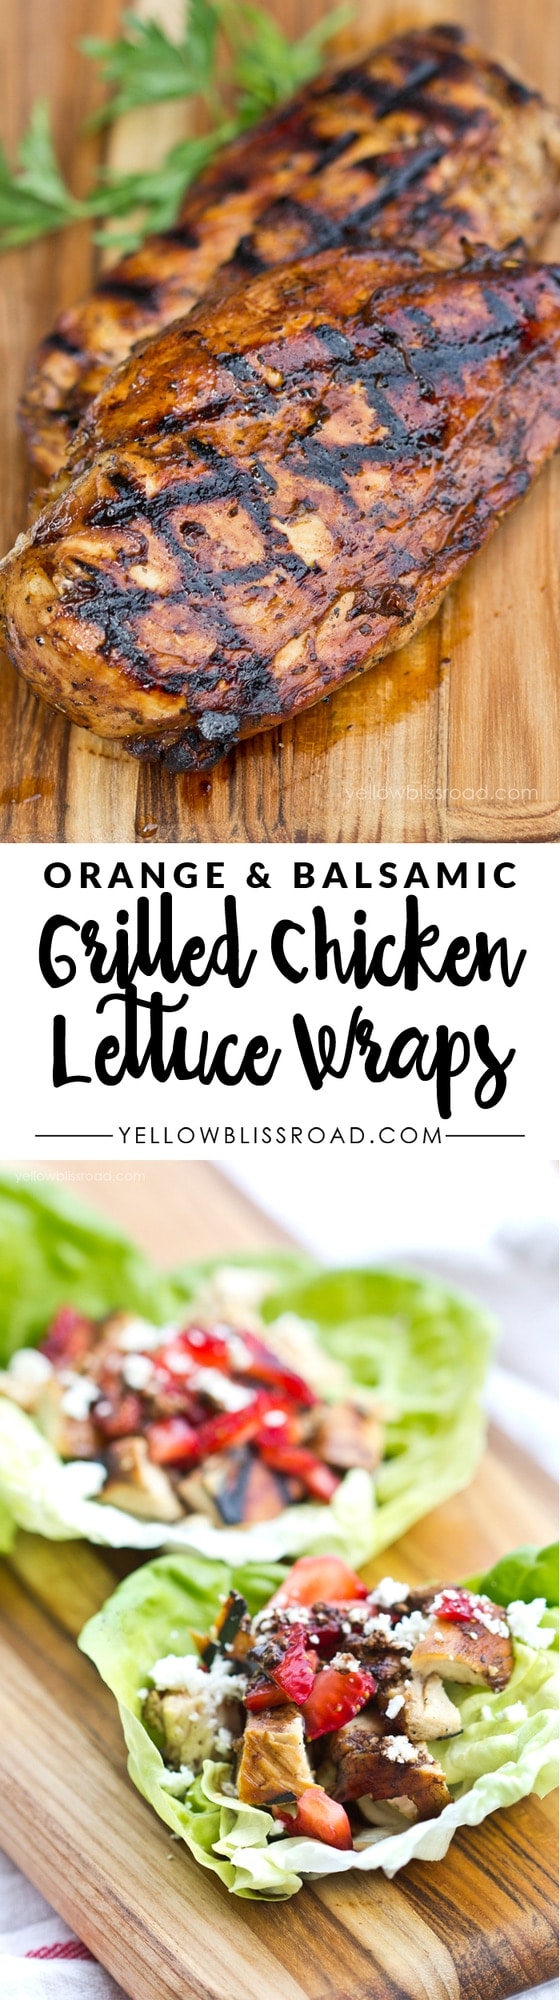 Balsamic Grilled Chicken Lettuce Wraps pinterest collage